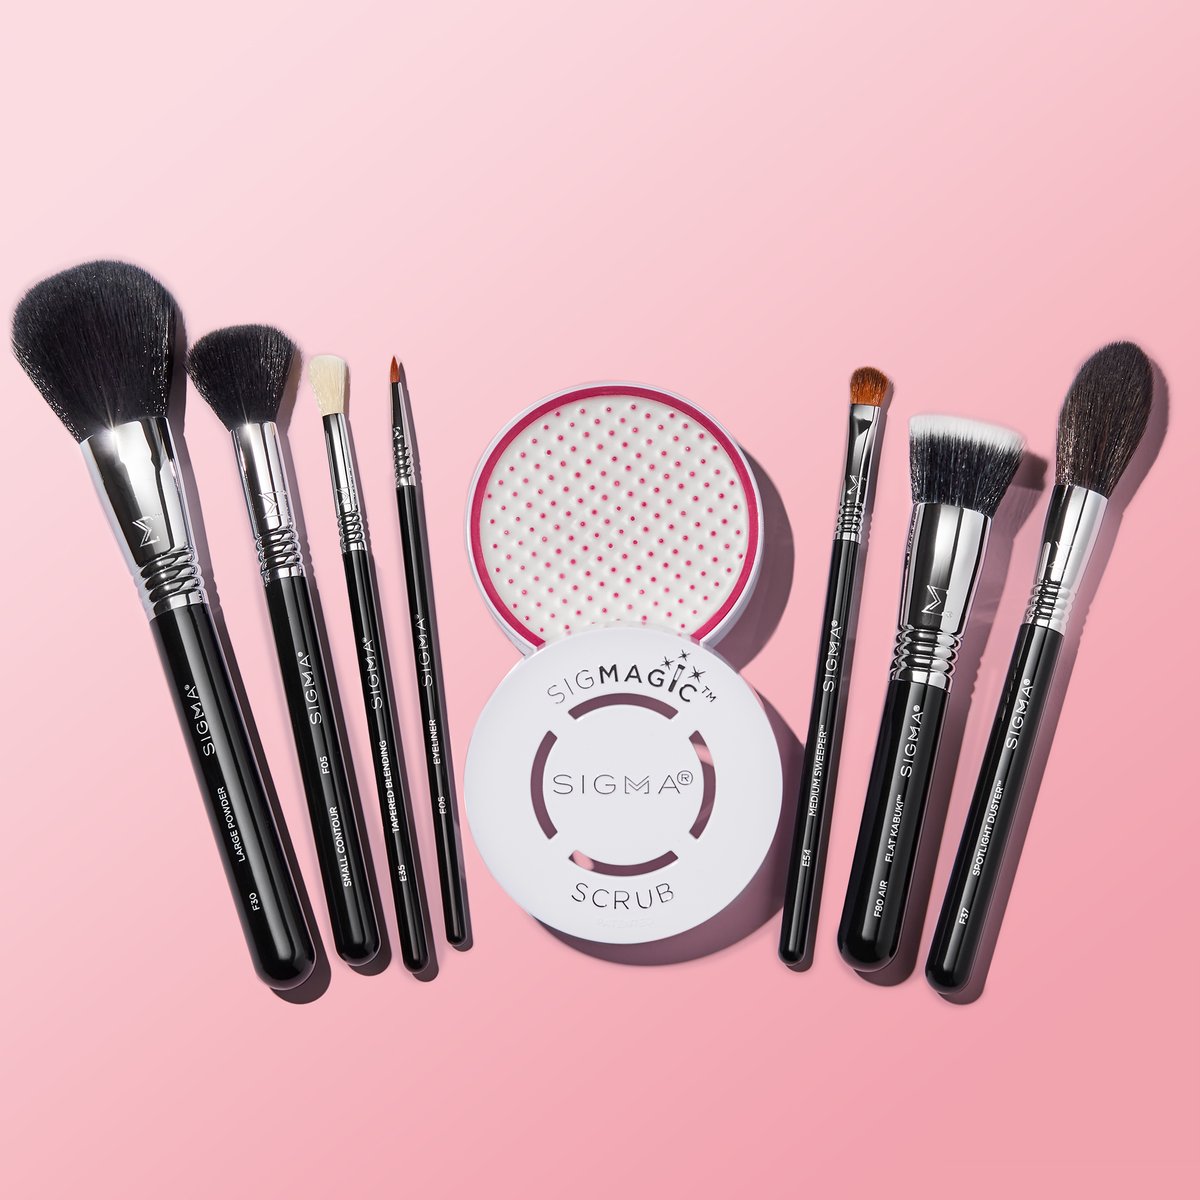 If you're reading this it's your sign to RUN & grab this new set including 8 of our best-selling products! 💝 Featuring 7 brushes perfect for creating any look, and a Sigmagic™ Scrub to keep them looking like new for years to come! ✨ Shop now at bit.ly/49EKpgz 💋